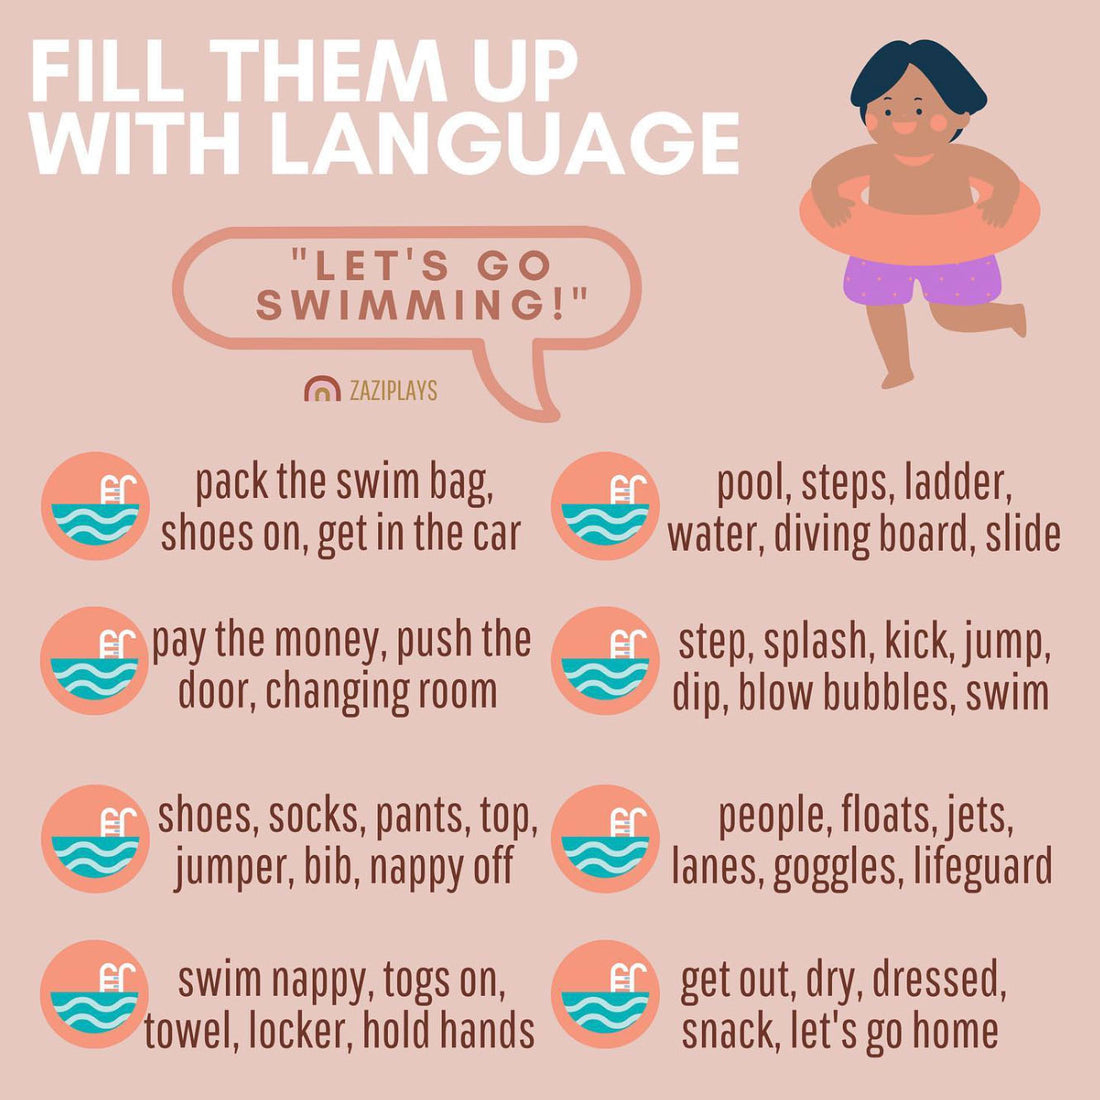 Fill them up with language: Swimming Edition